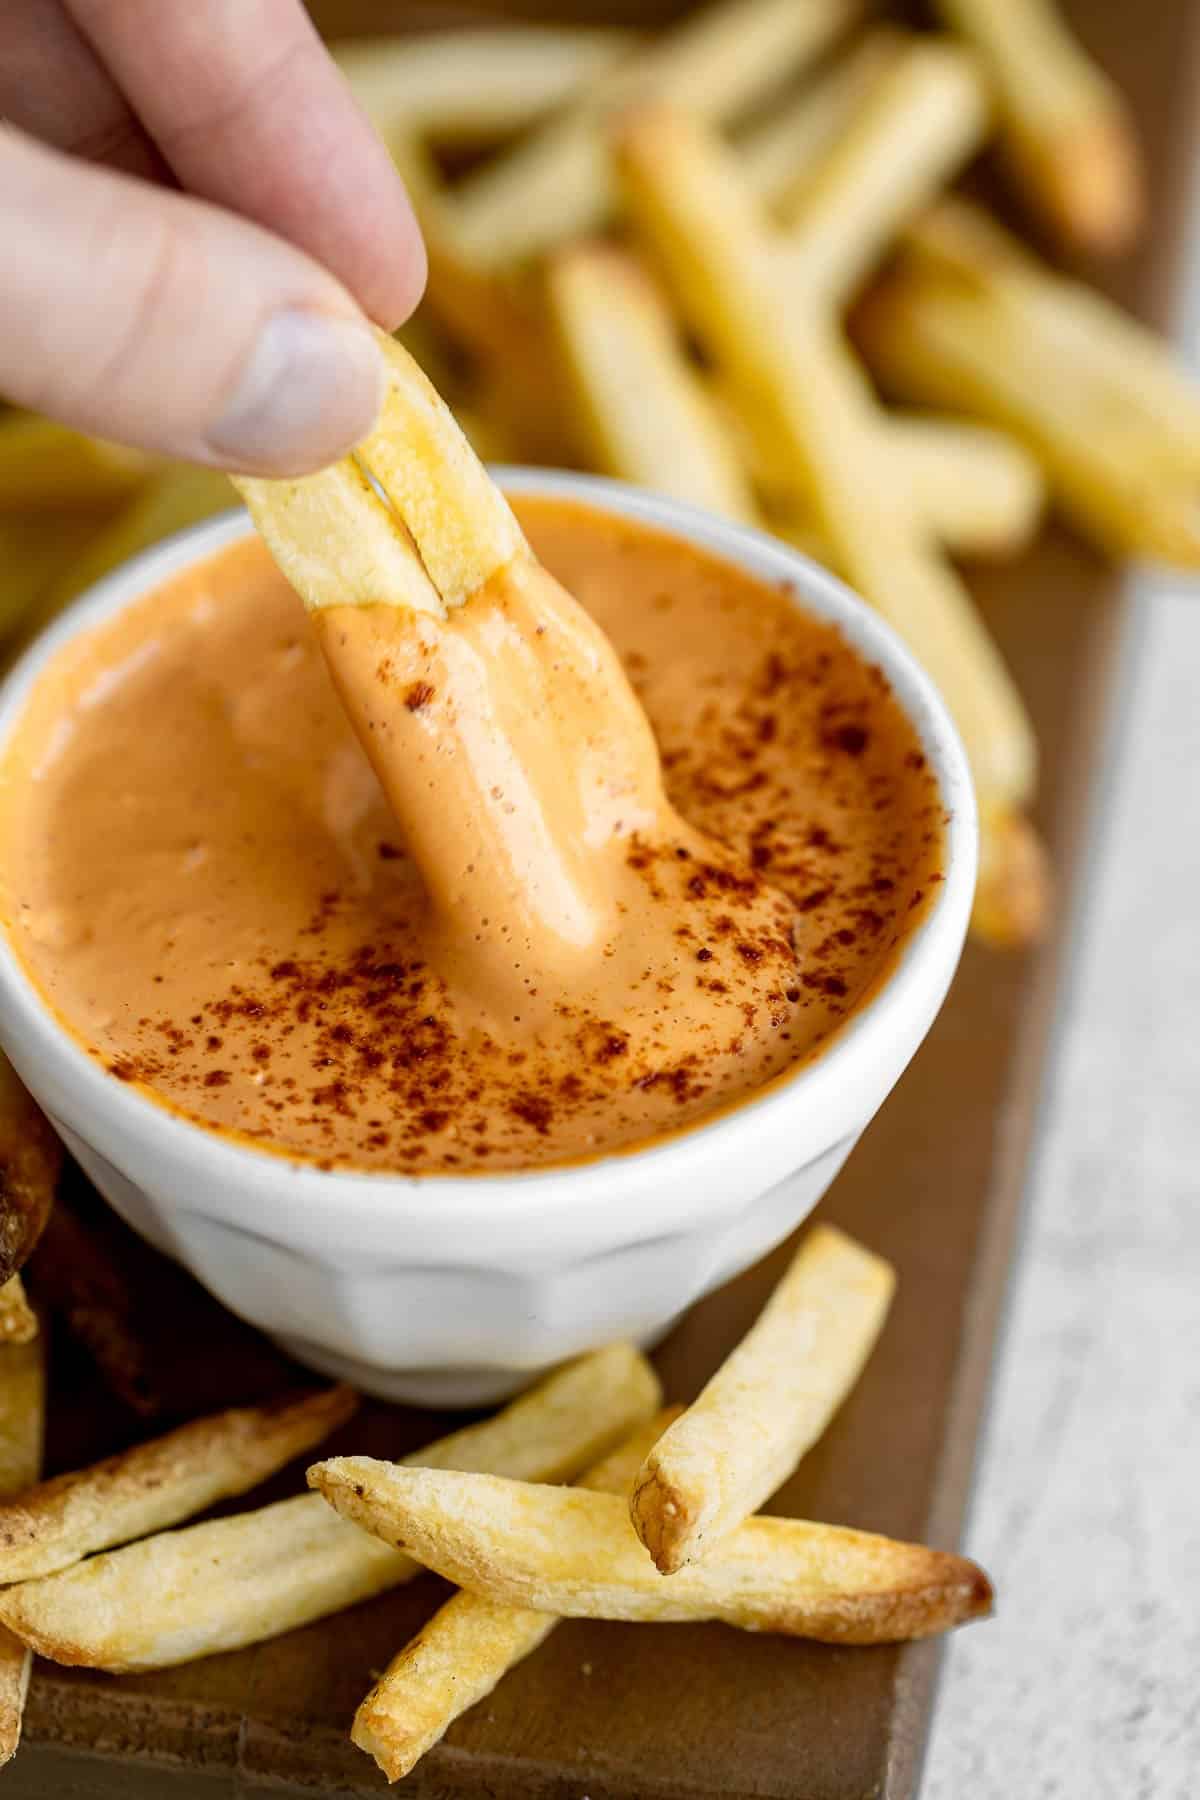 dipping two french fries into the vegan chipotle aioli in a white bowl